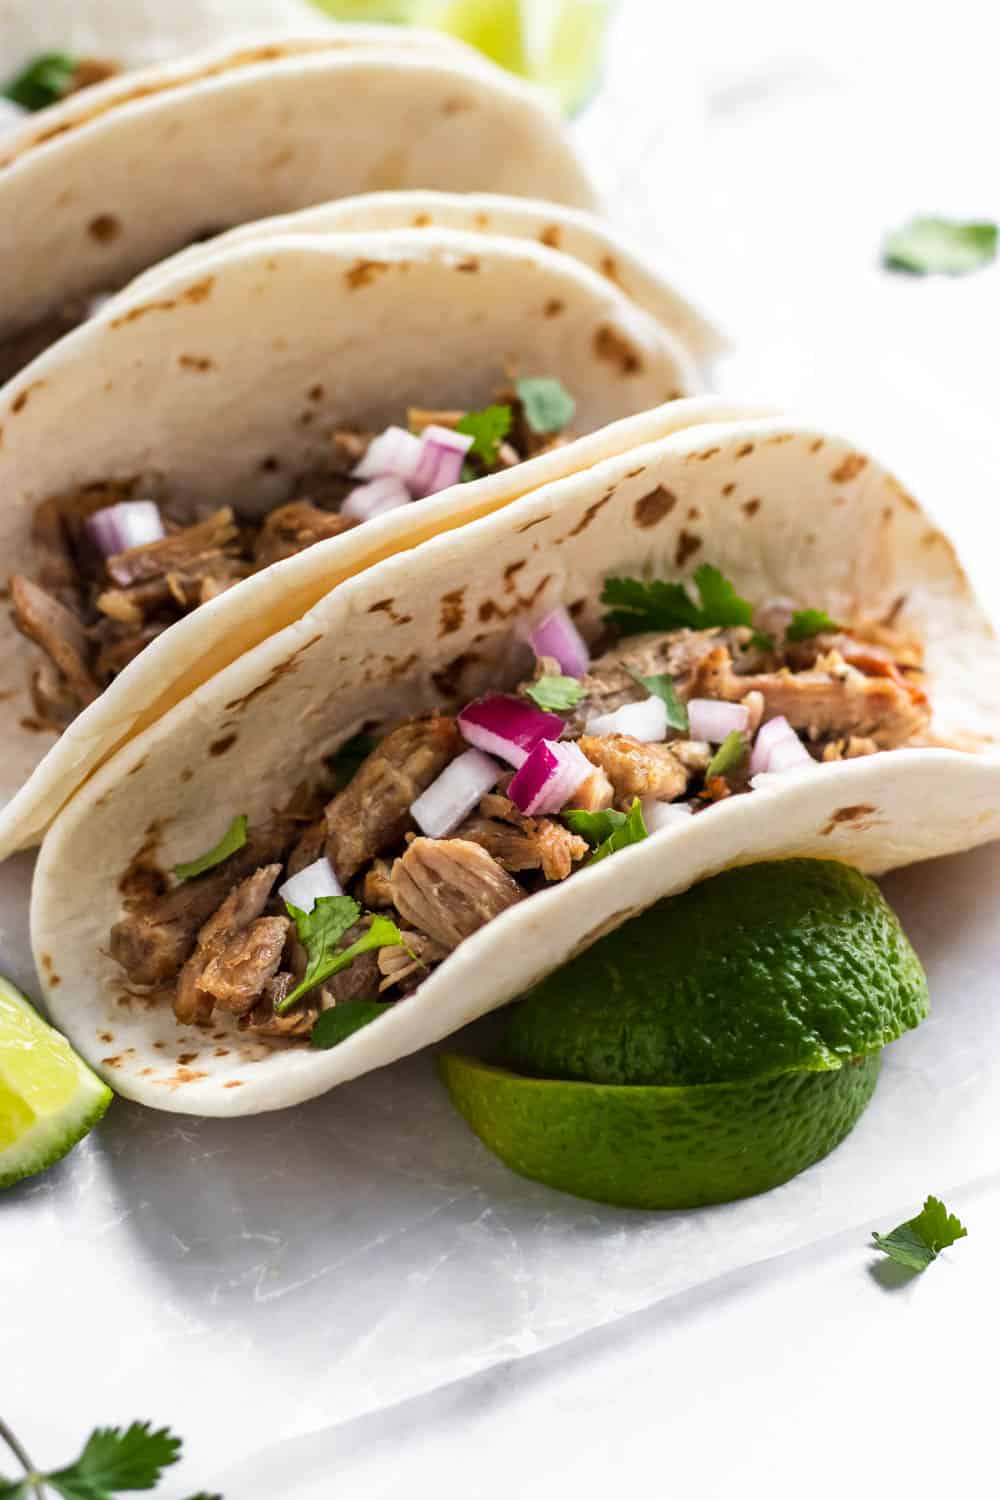 Carnitas tacos topped with red onion and cilantro.